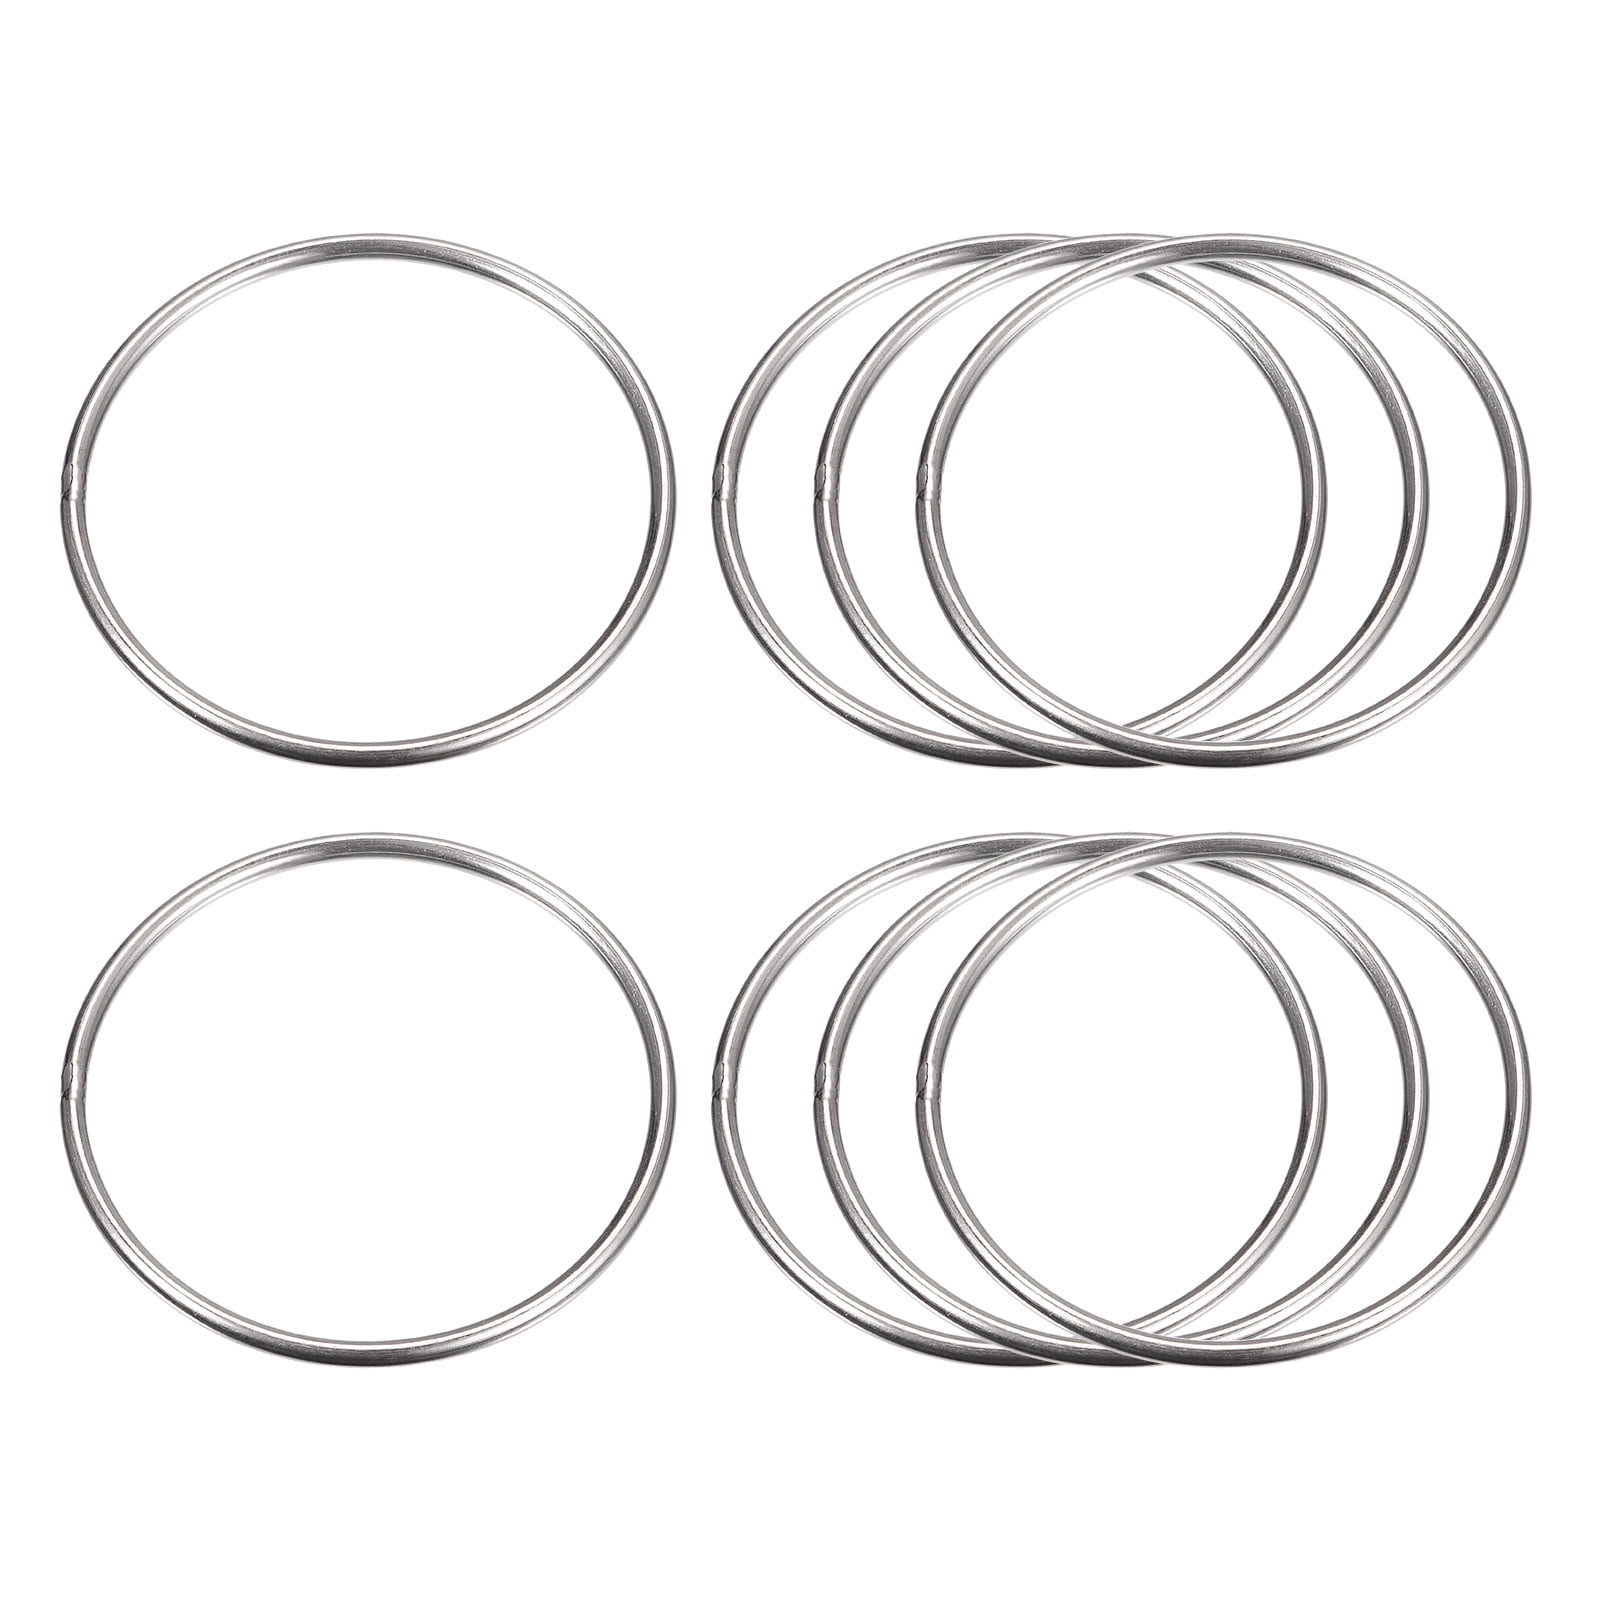 O-Ring Stainless Steel/Gepolijst 40 x 4,5mm